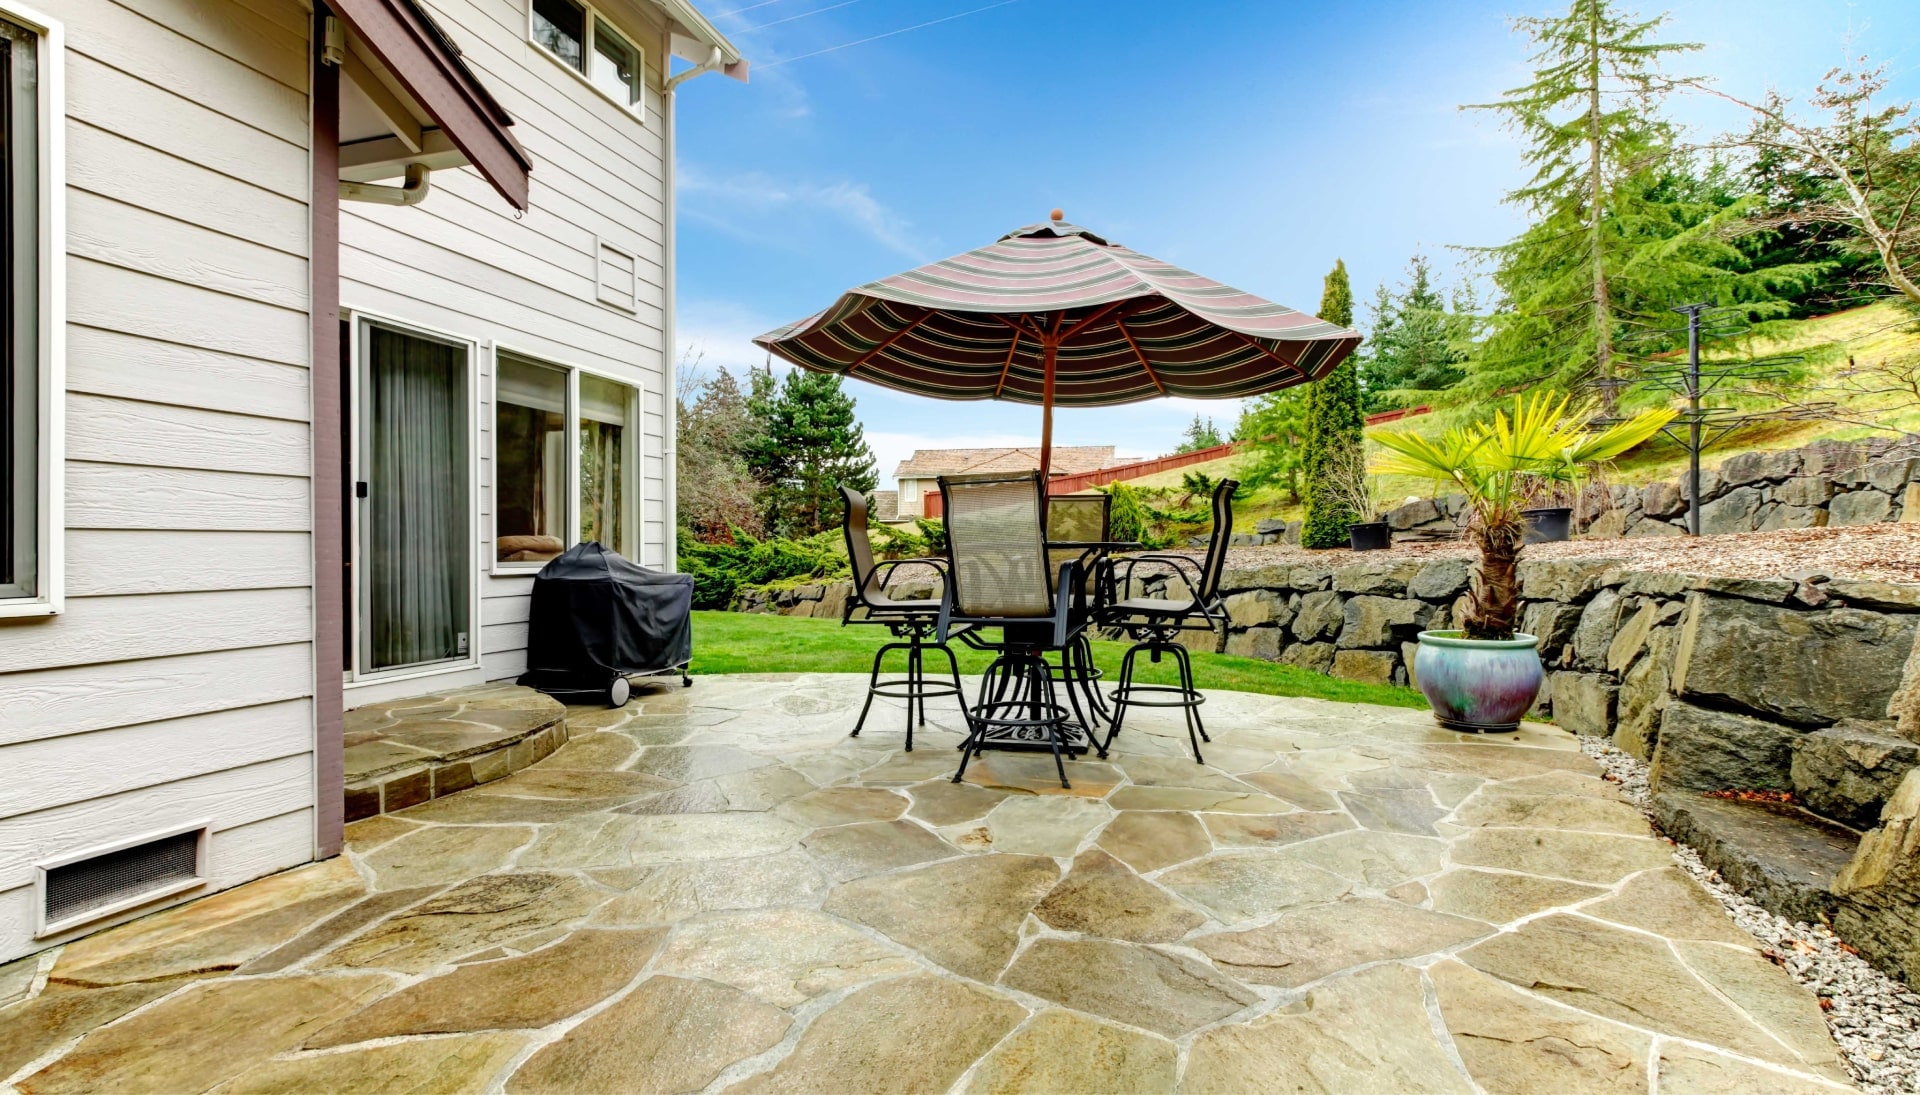 Beautifully Textured and Patterned Concrete Patios in Fort Collins, Colorado